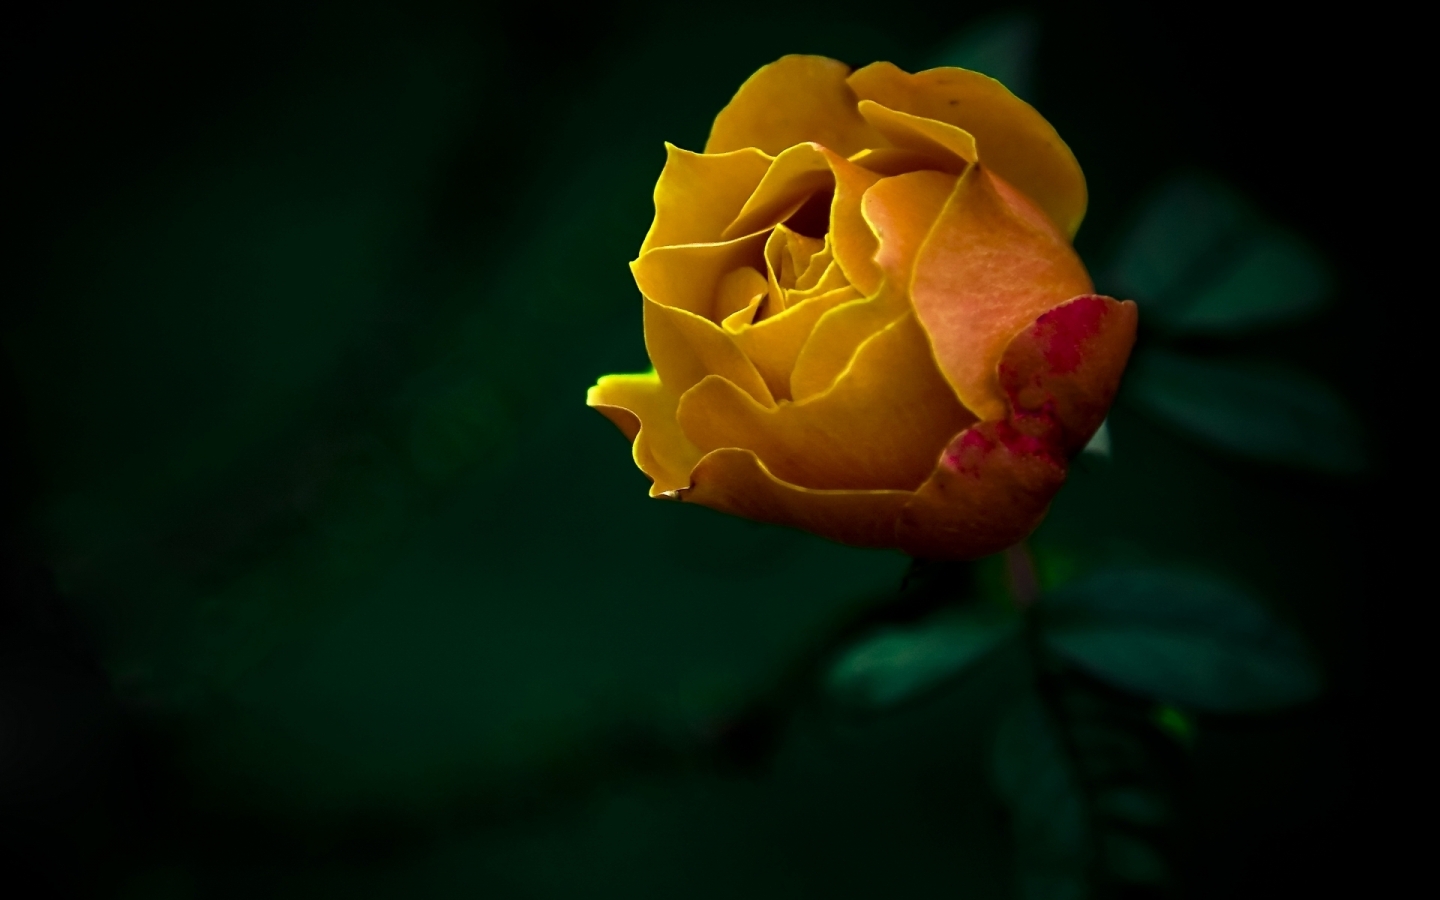 The last Rose for 1440 x 900 widescreen resolution